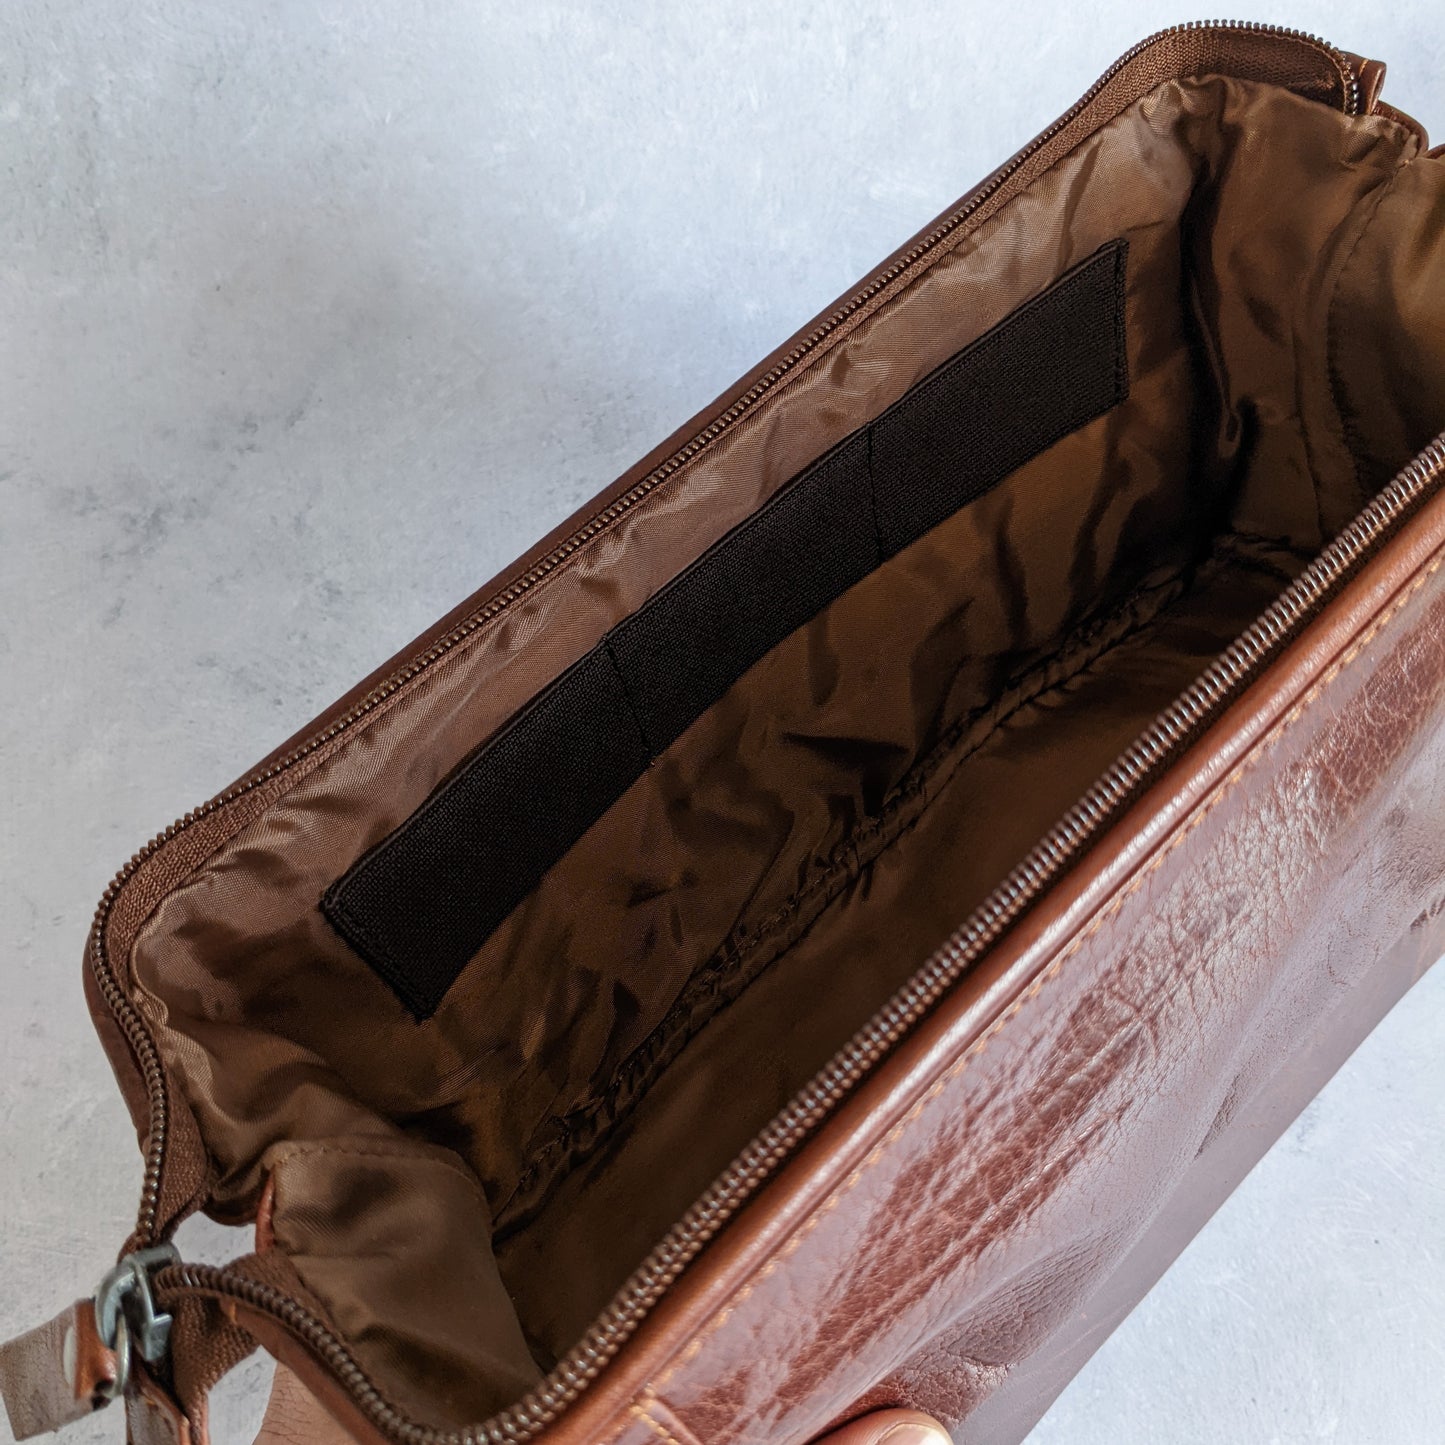 Brown Leather Personalised Washbag - with Wide Opening & Bottom Compartment